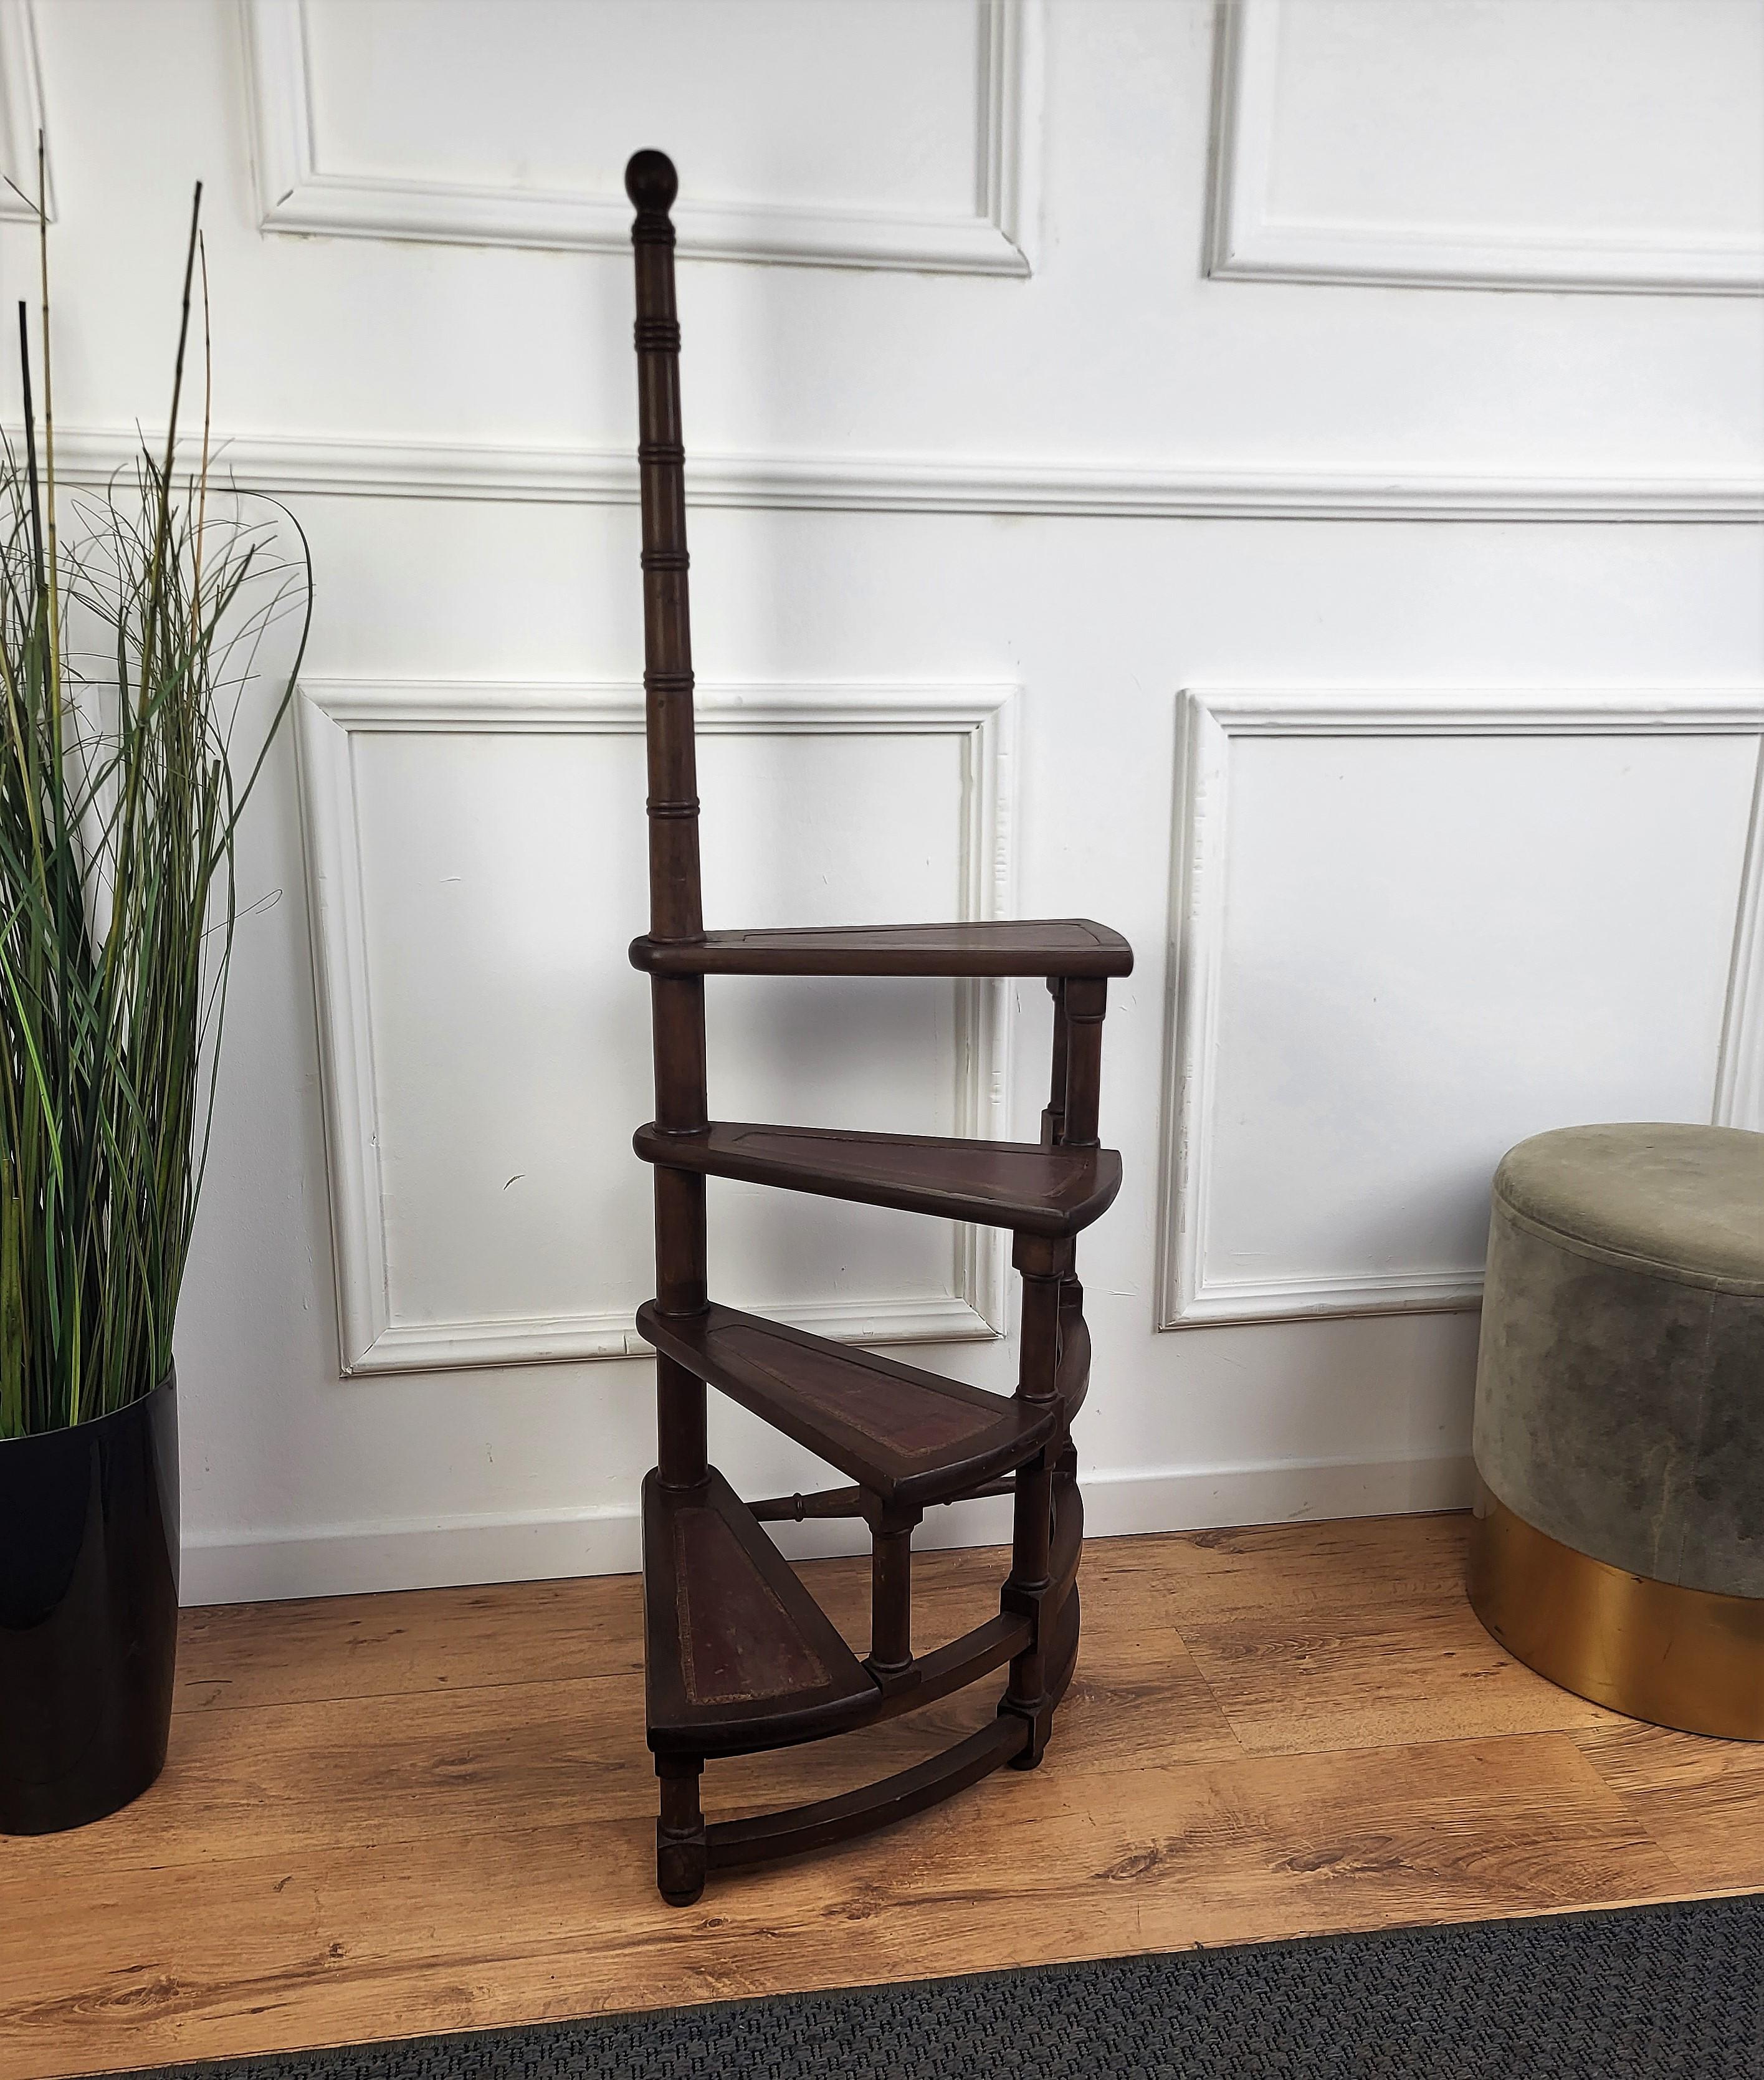 Beautiful Italian carved walnut wood tall circular step ladder with four stairs rolled around a turned, central post embellished with a decorative finial. Each step is upholstered with red leather and golden classic frame. Versatile and practical,